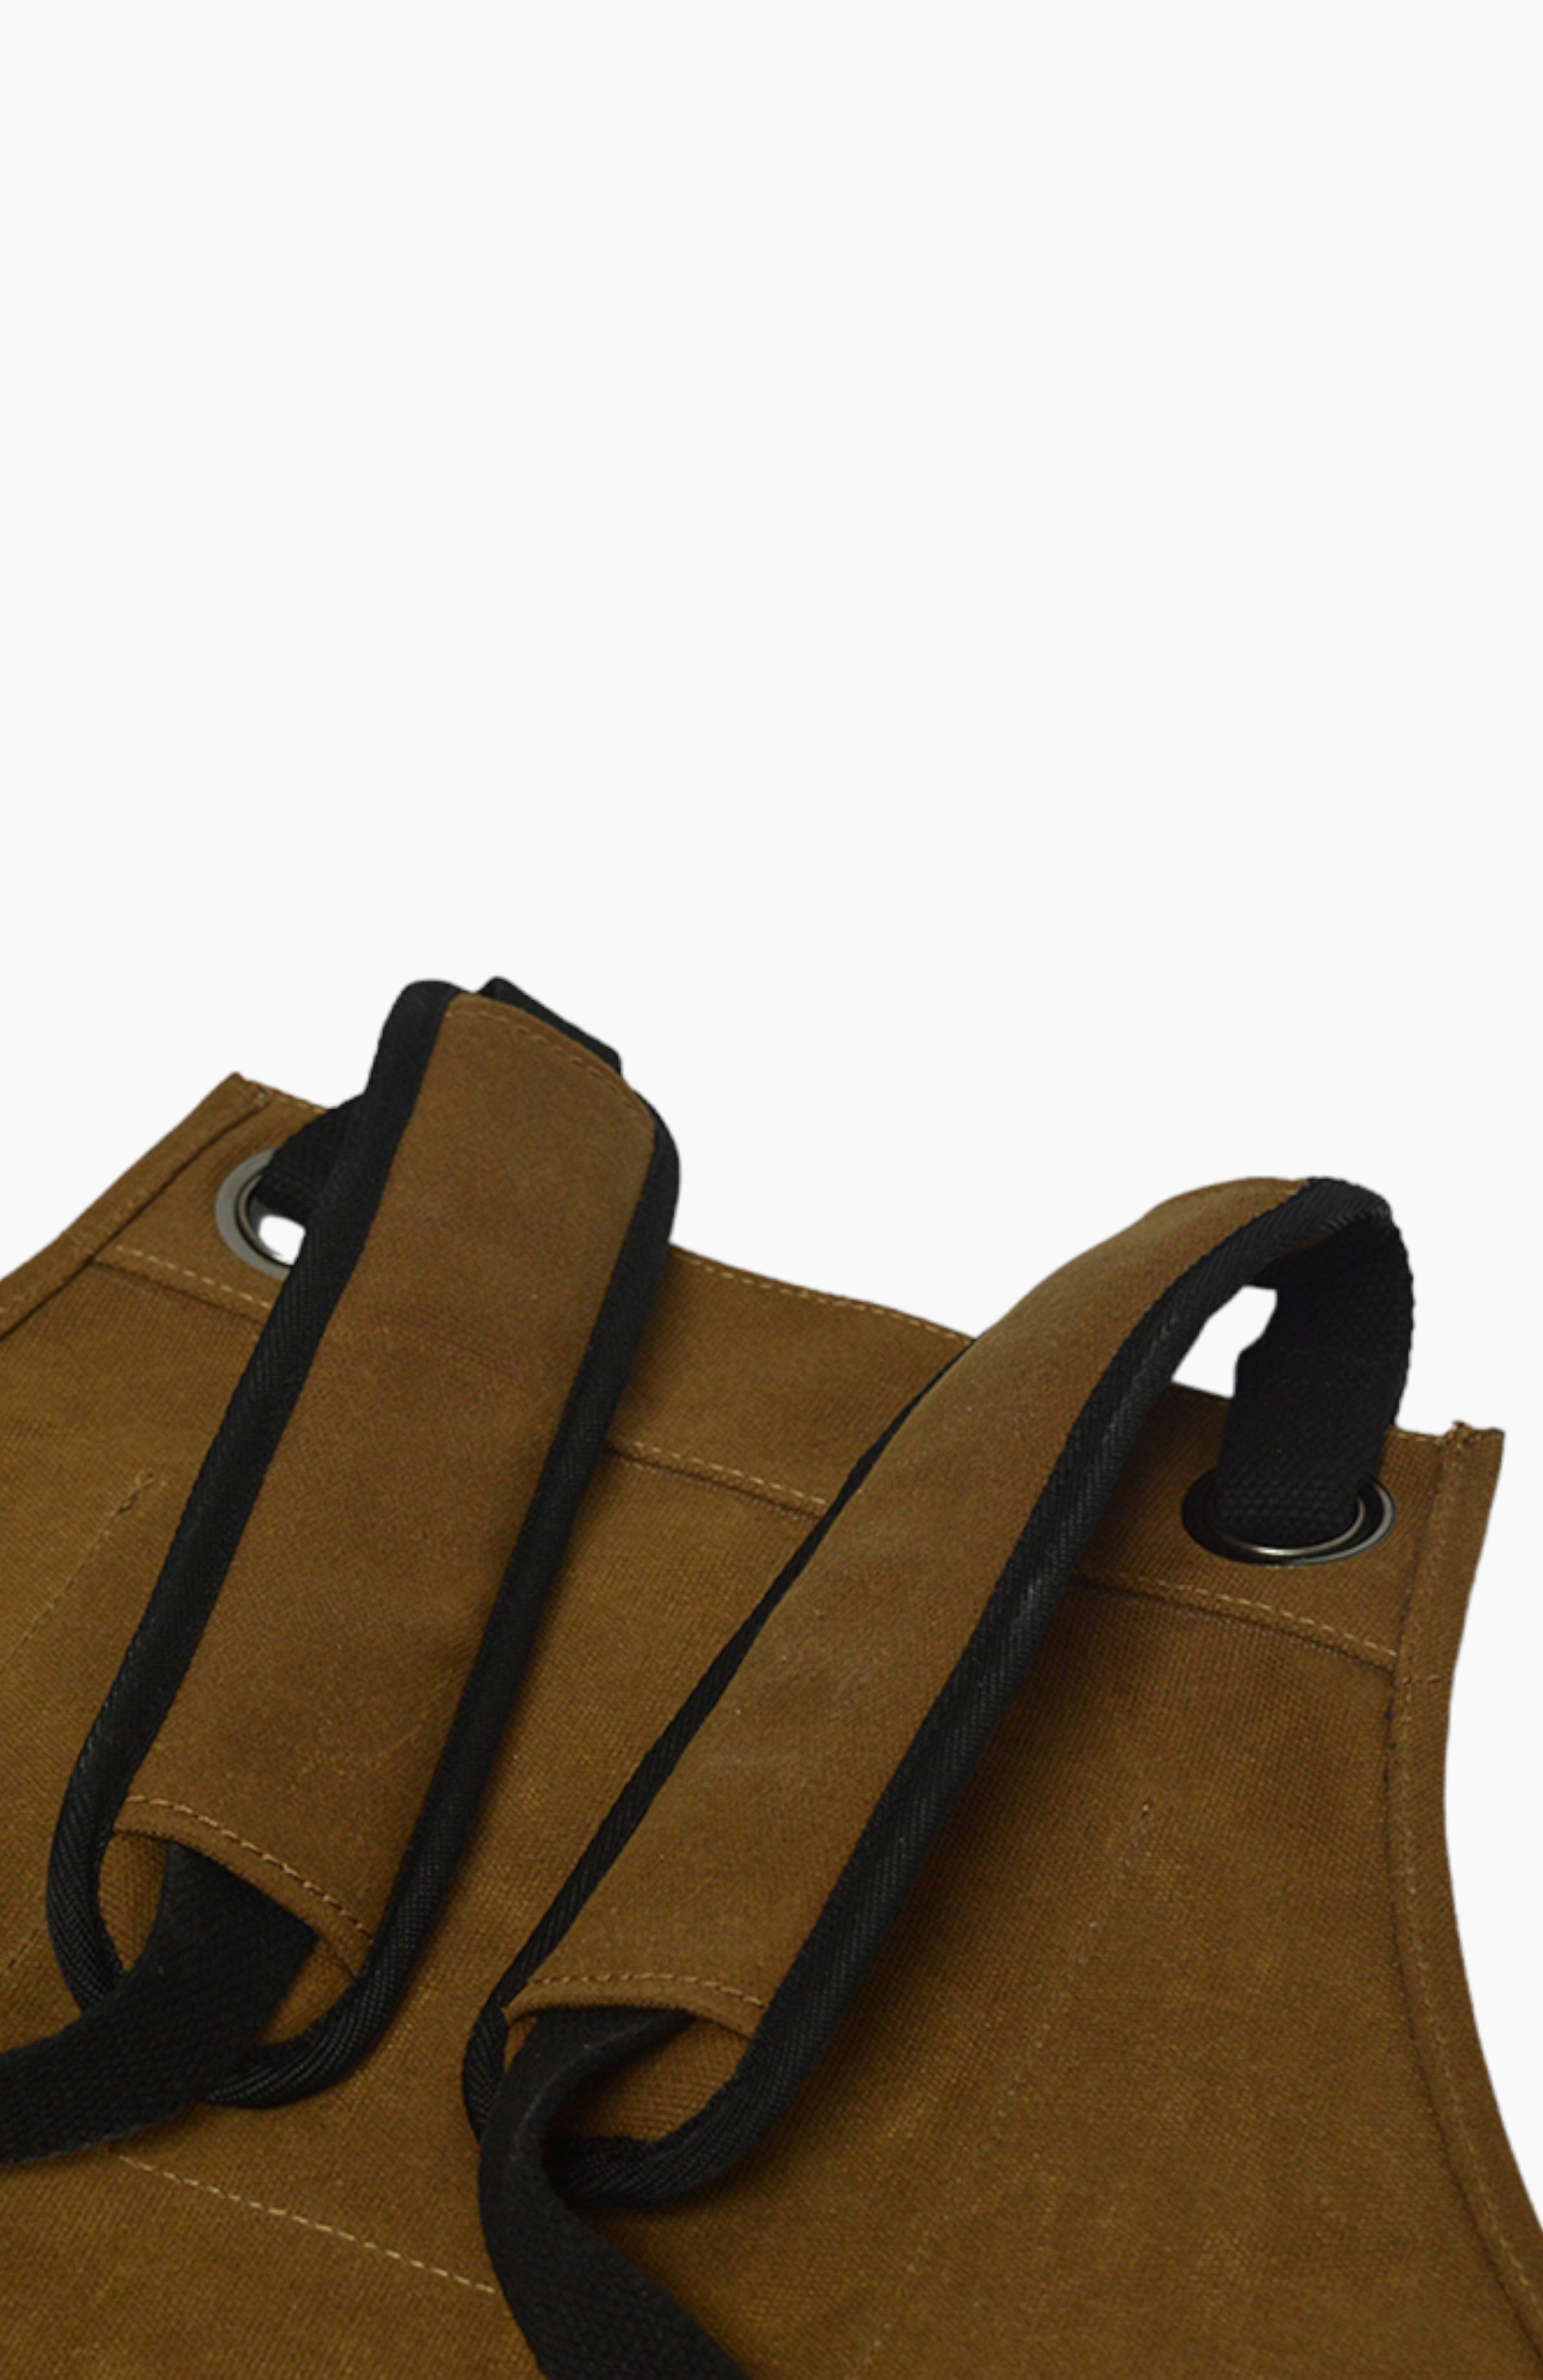 Close up of the padded back straps on a brown leather apron.